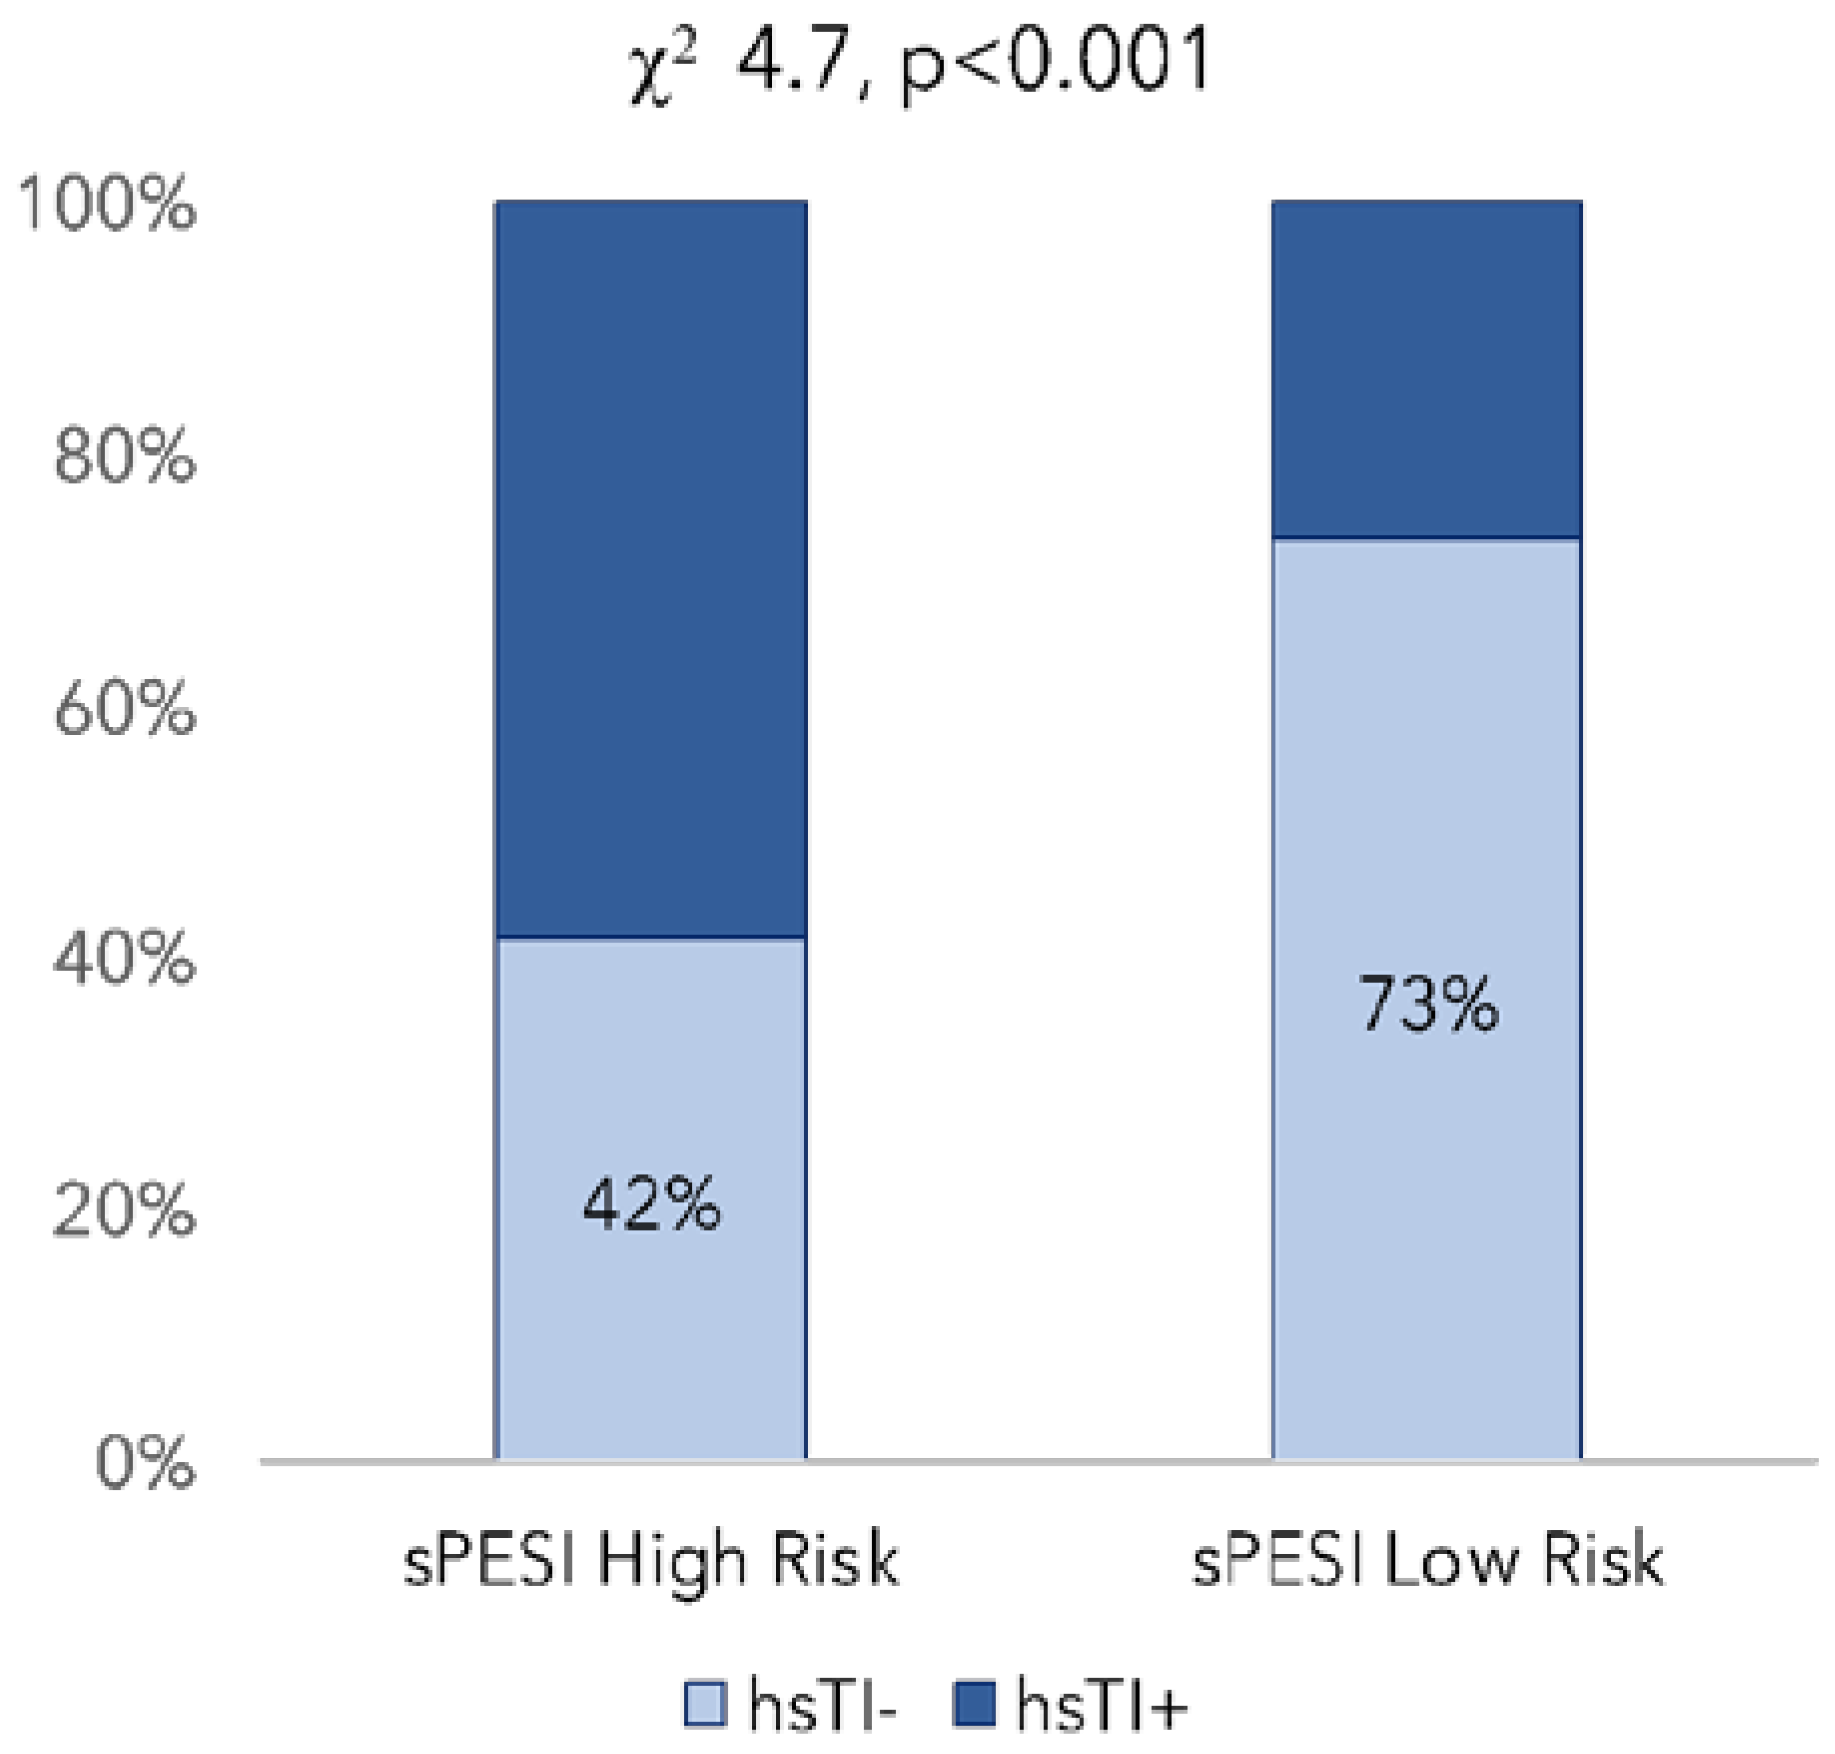 Medicina | Free Full-Text | Utility of Combining High-Sensitive Cardiac  Troponin I and PESI Score for Risk Management in Patients with Pulmonary  Embolism in the Emergency Department